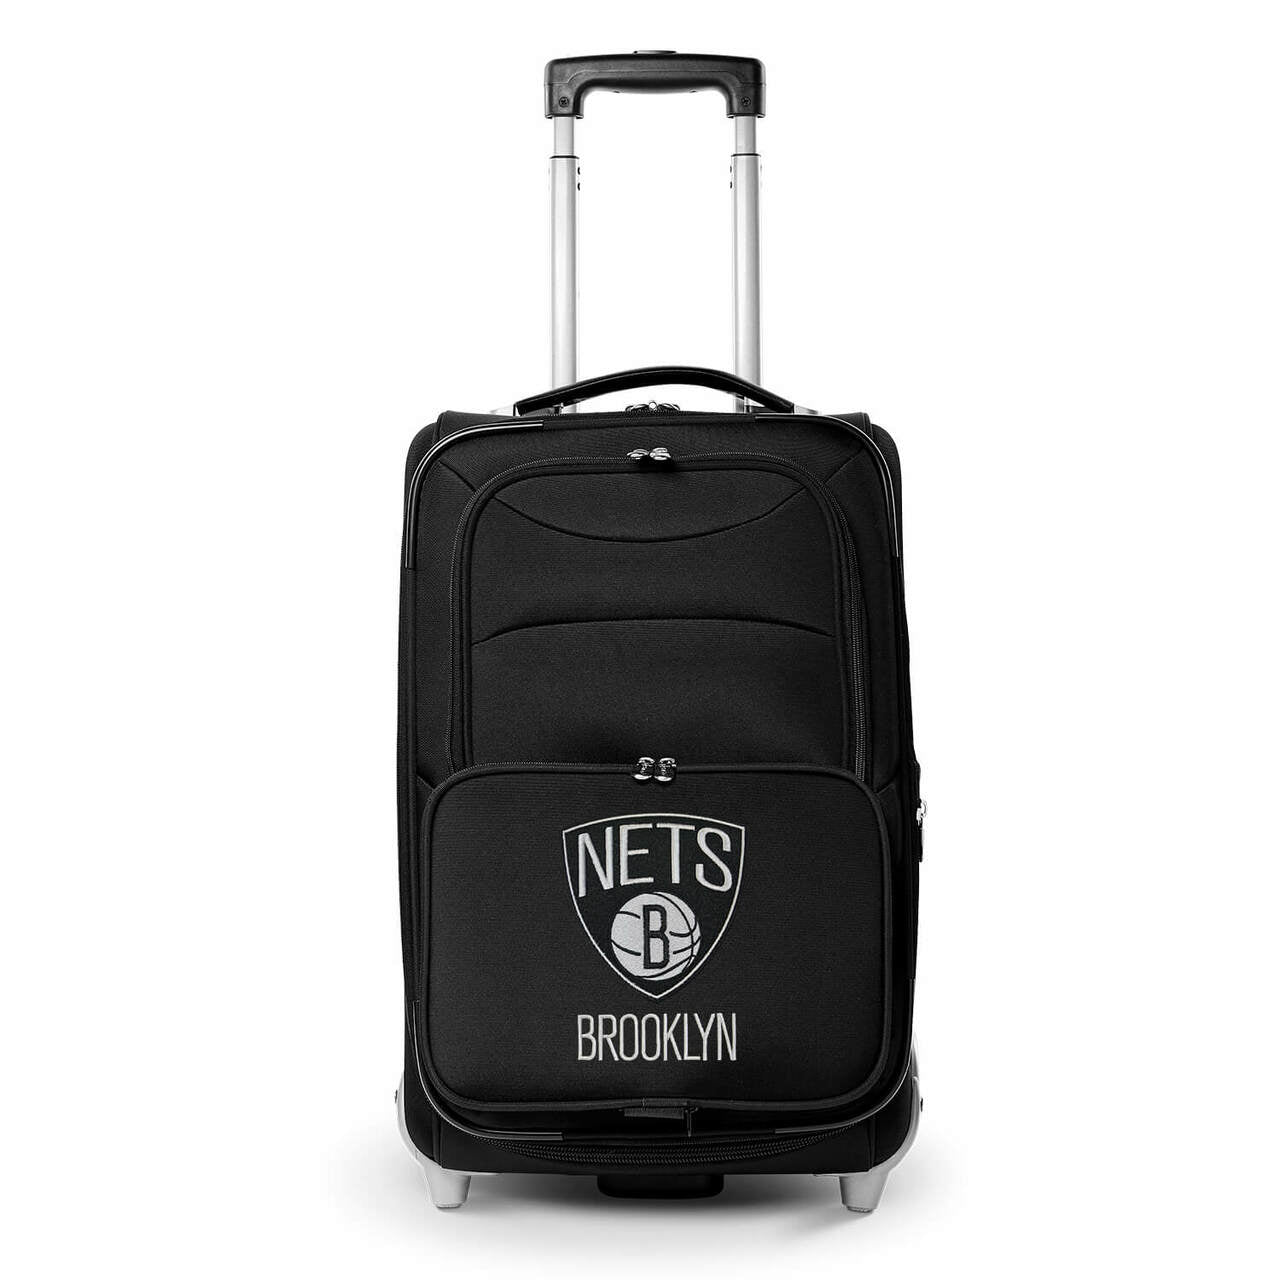 Nets Carry On Luggage | Brooklyn Nets Rolling Carry On Luggage